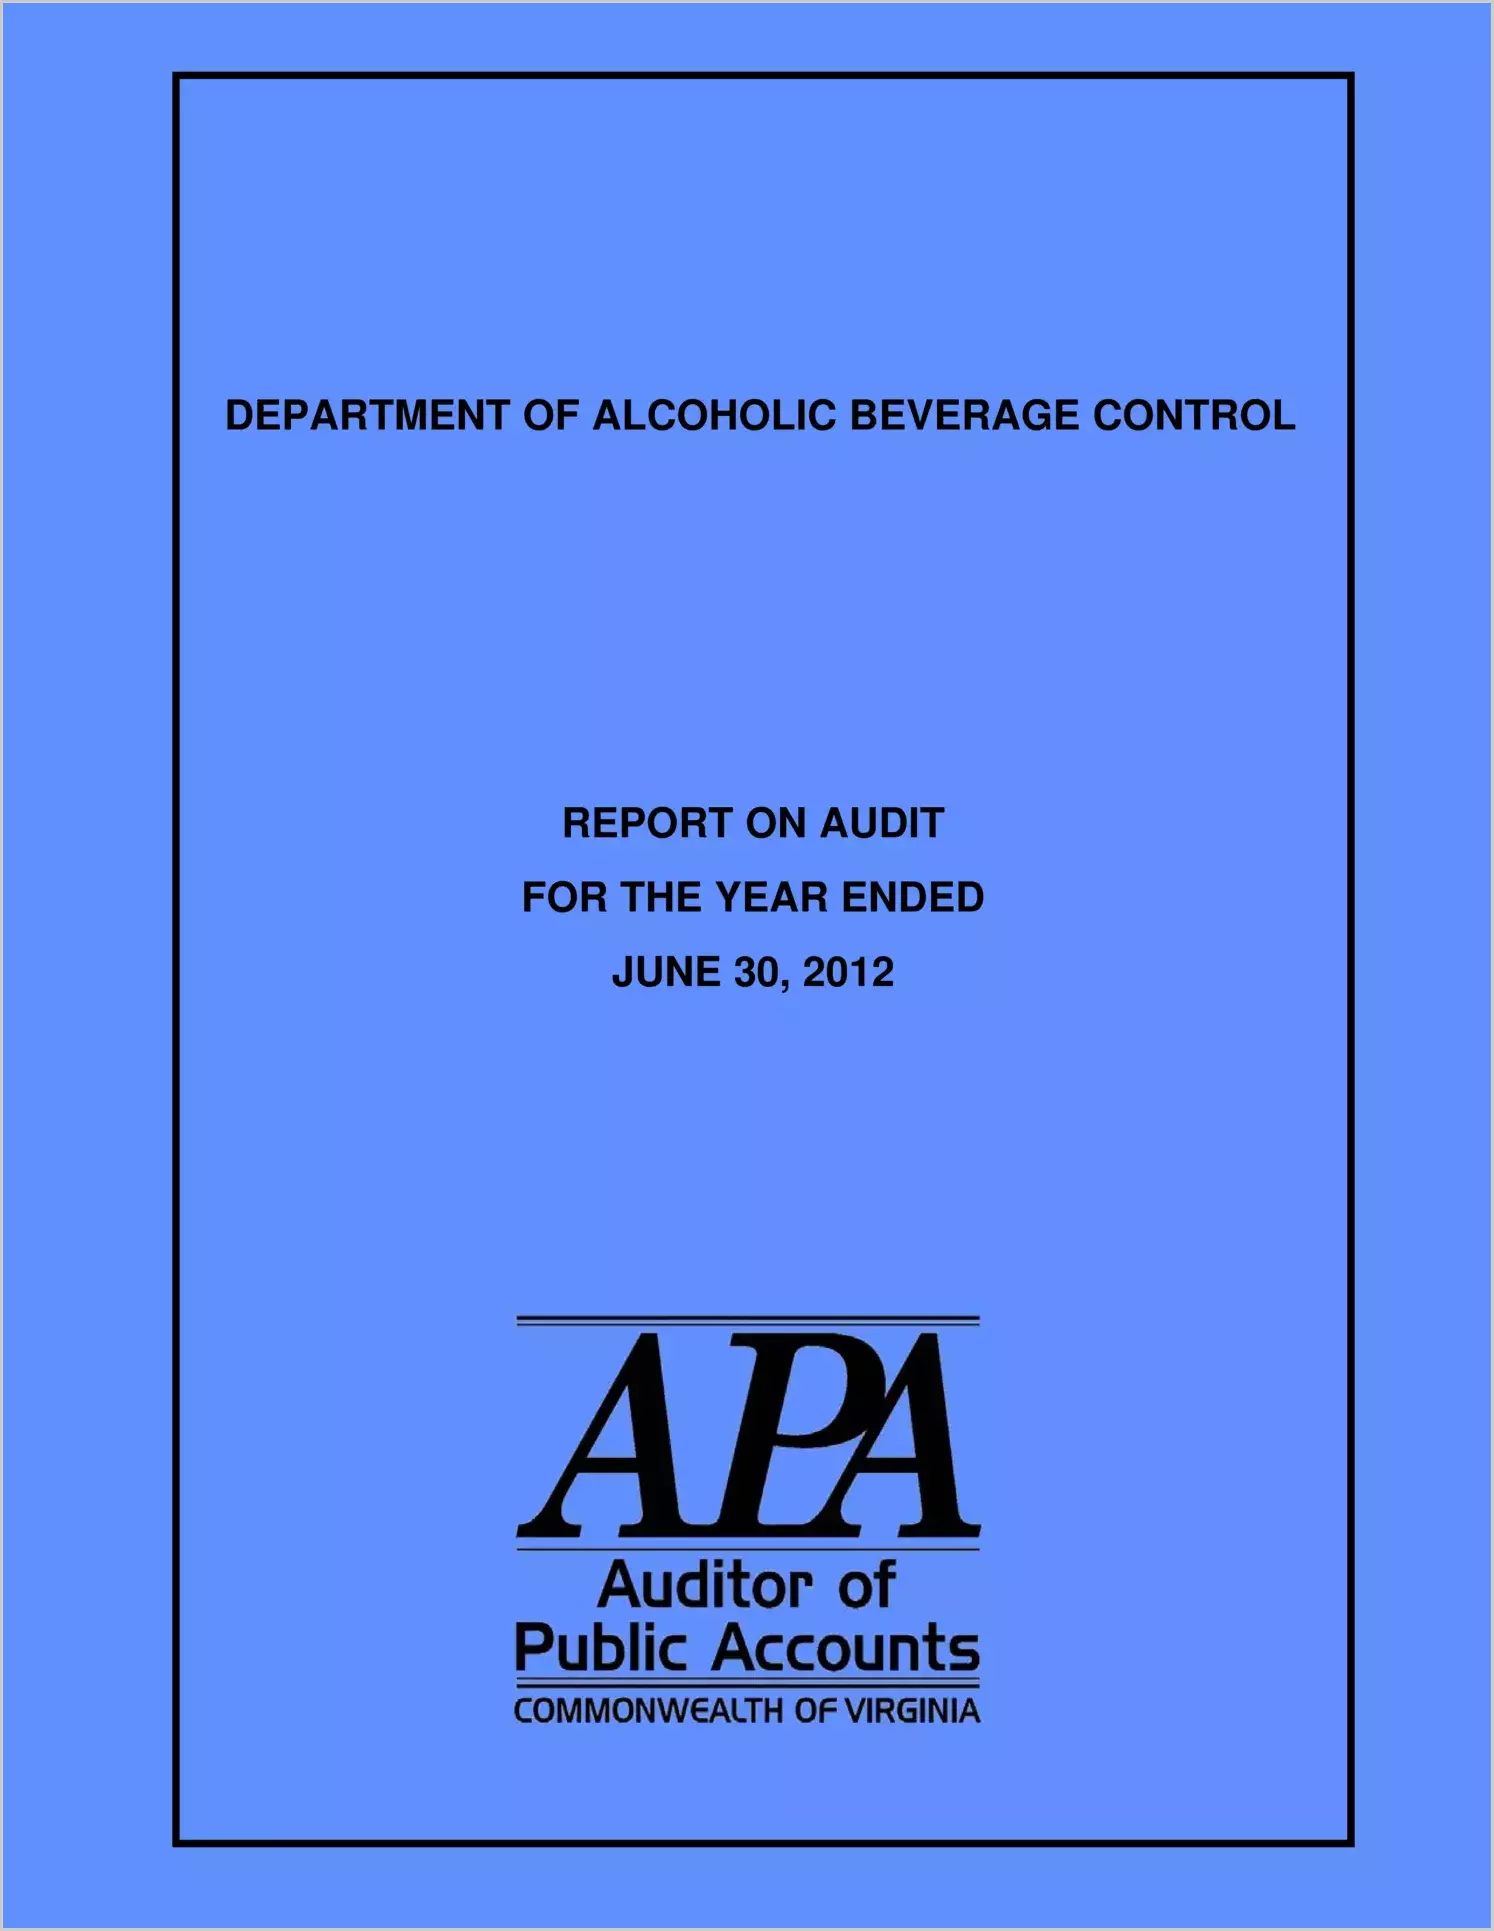 Department of Alcoholic Beverage Control as of and for the year ended June 30, 2012